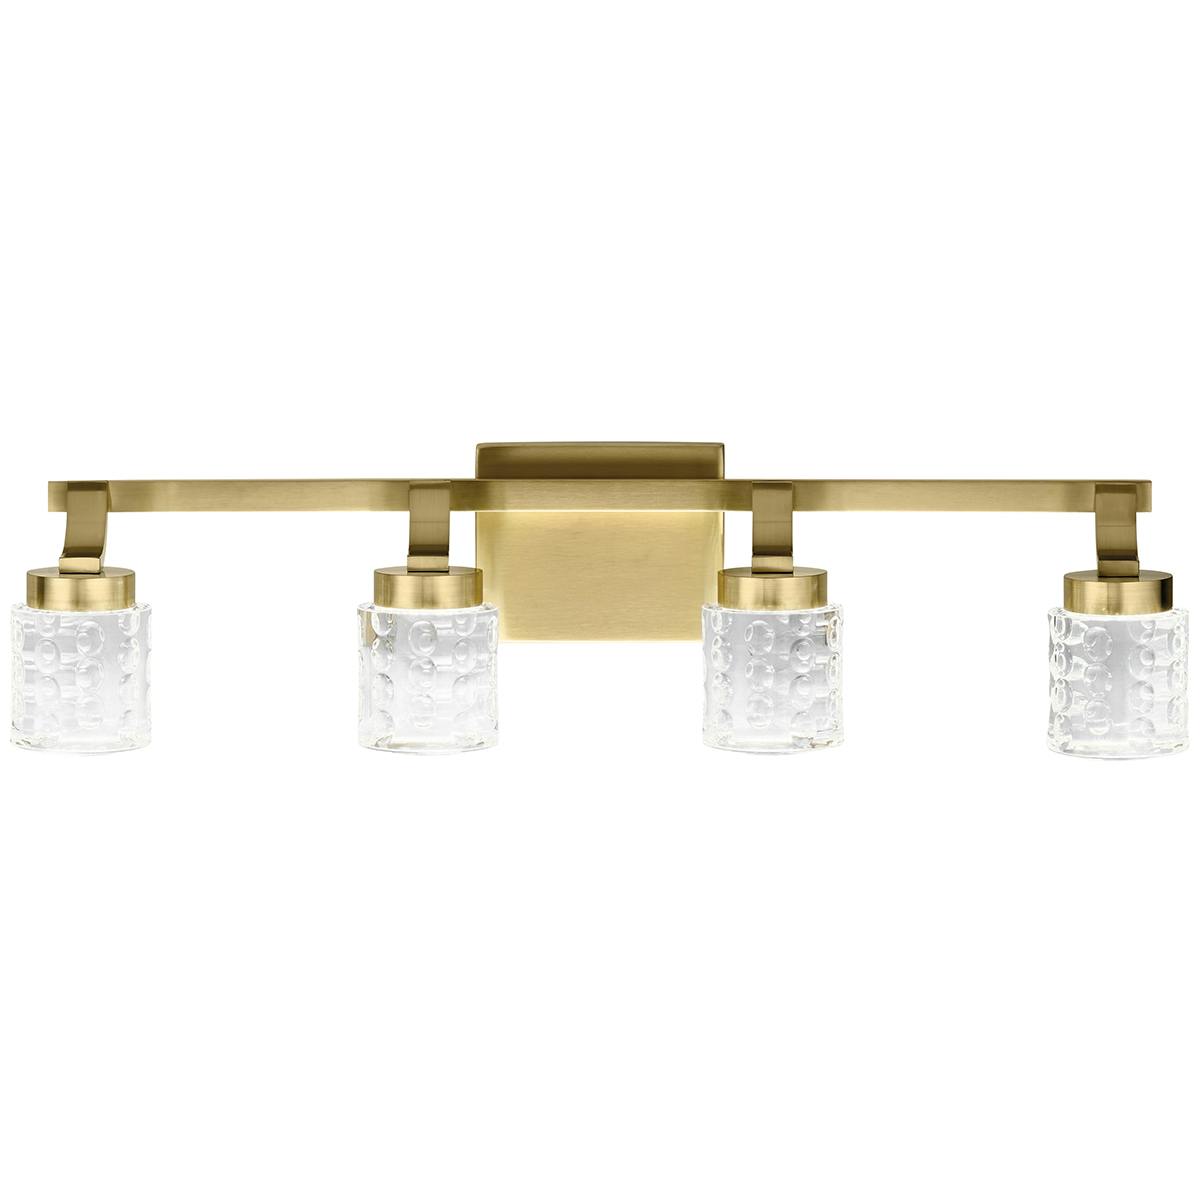 The Rene 3000K LED 3 Light Bath Light in Gold facing down on a white background